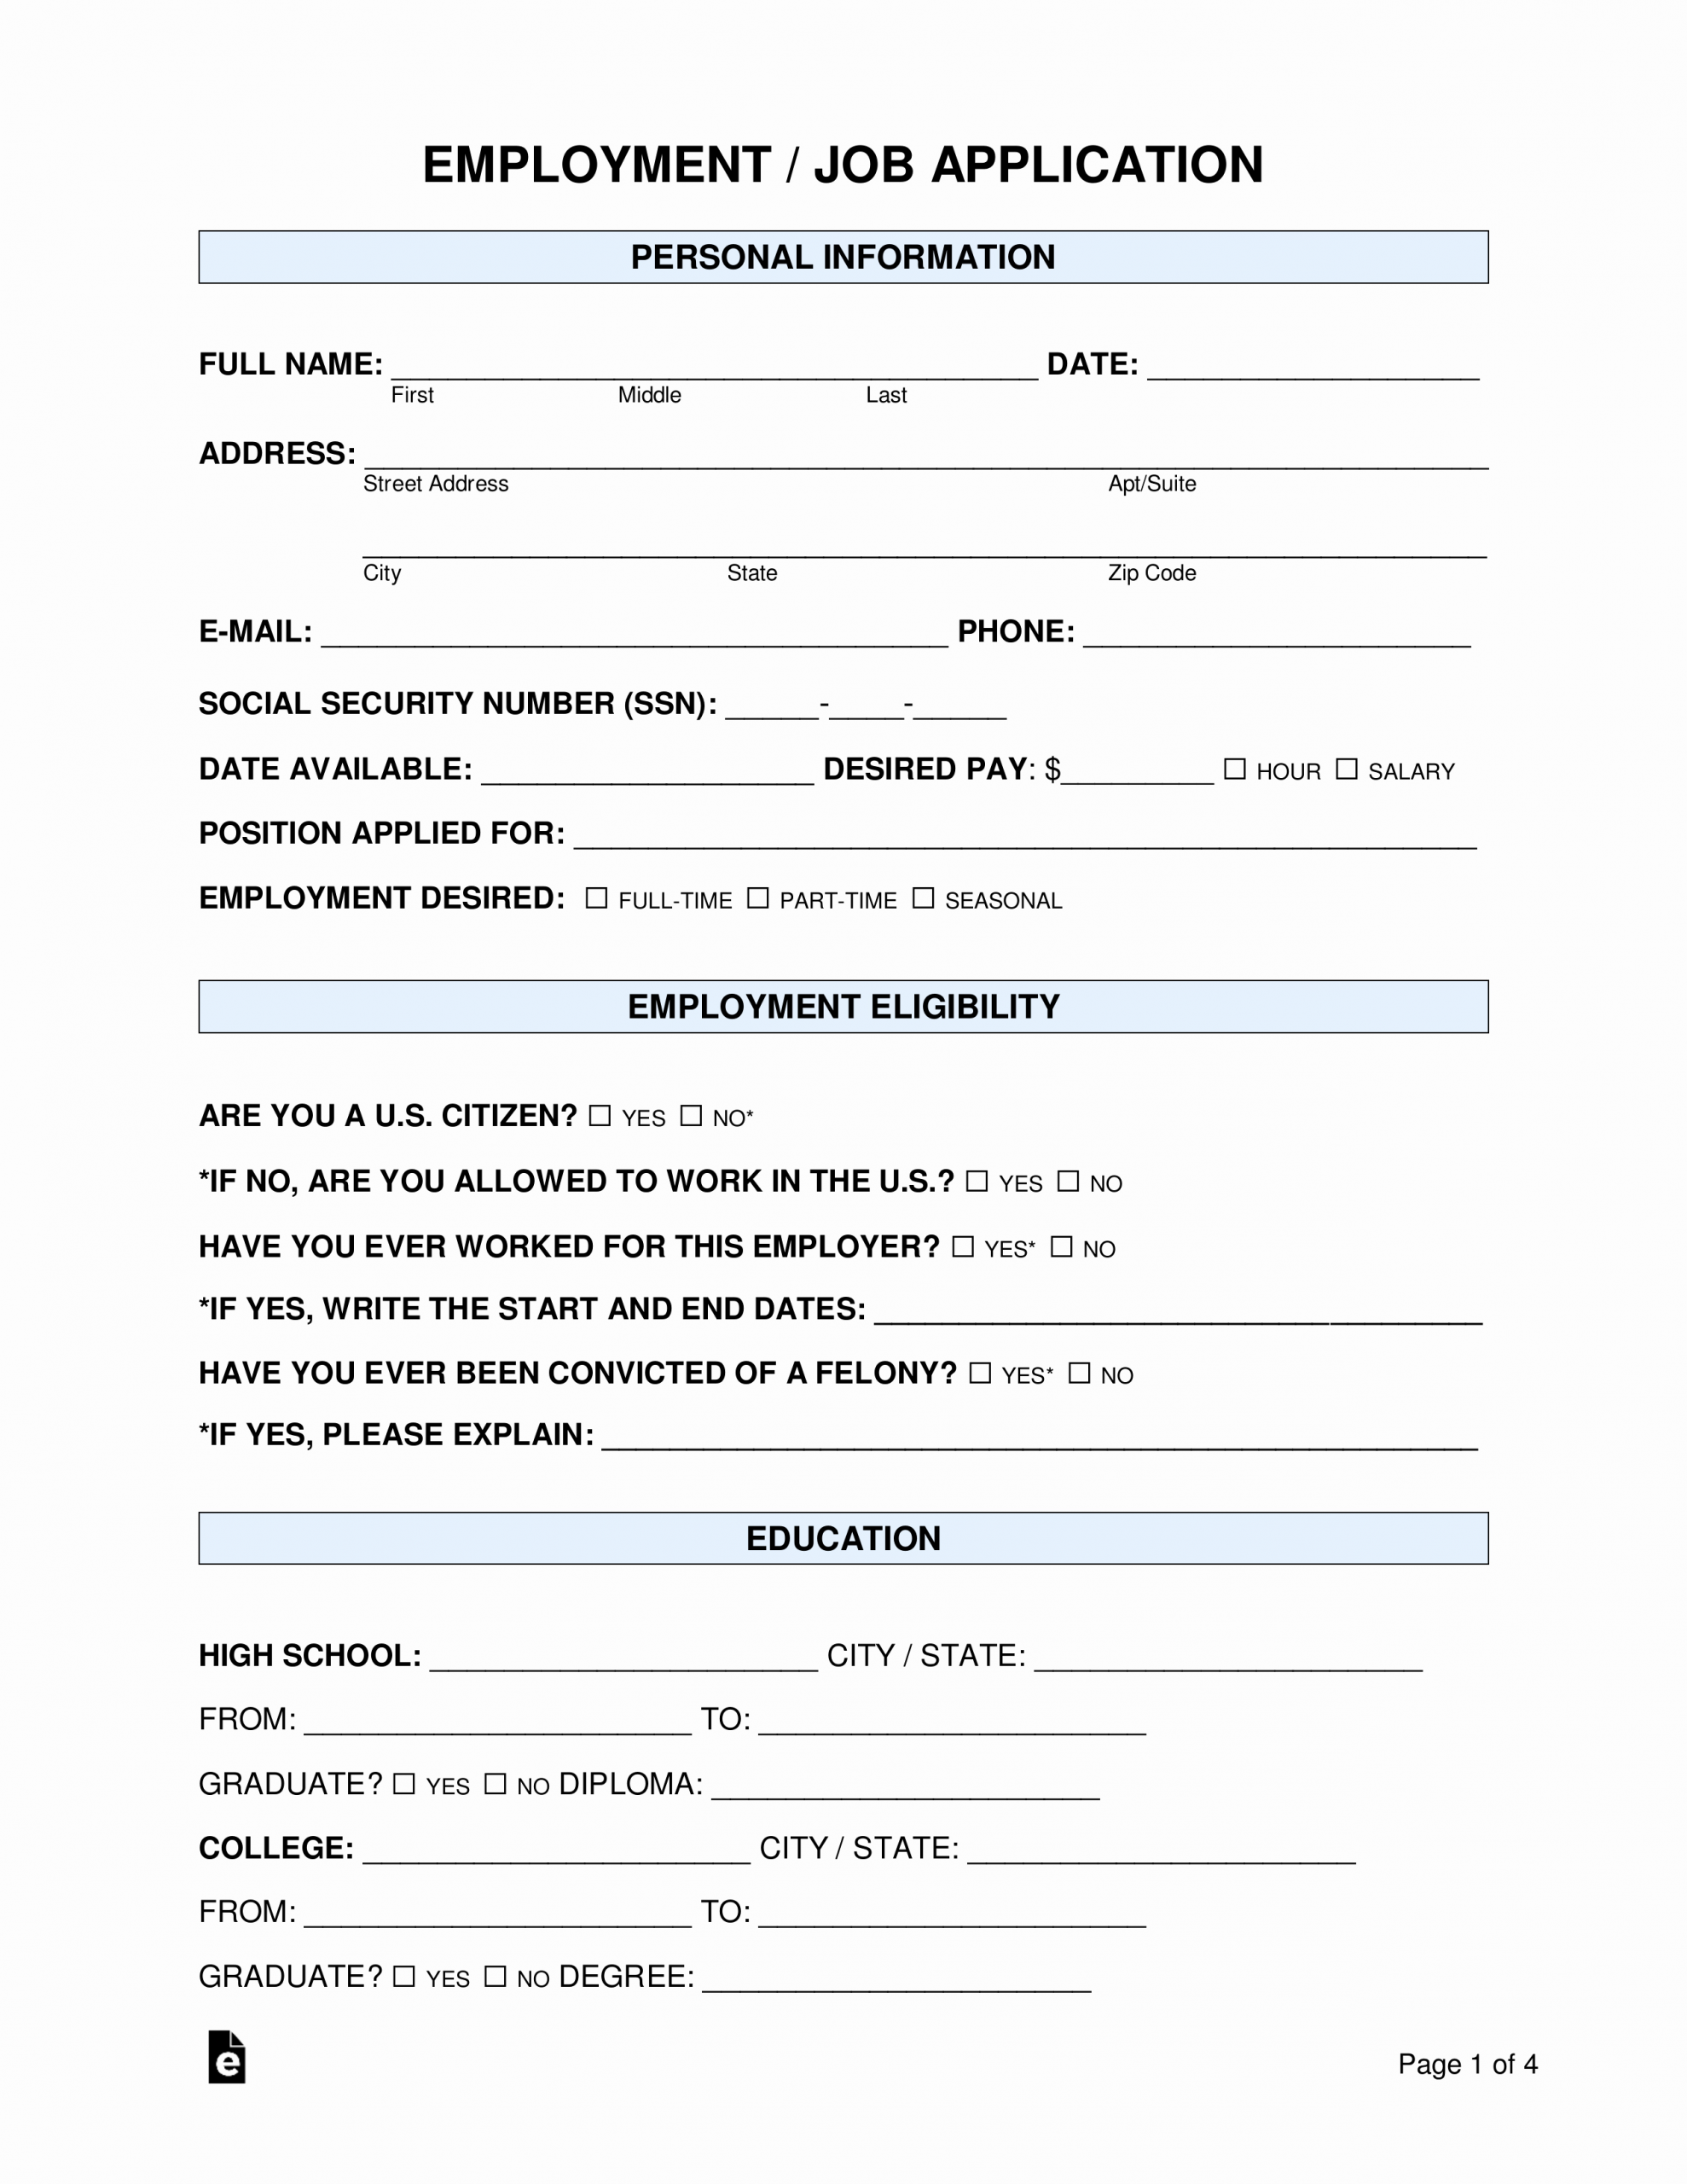 Employee Application form Template Free Unique Free Job Application form Standard Template Pdf